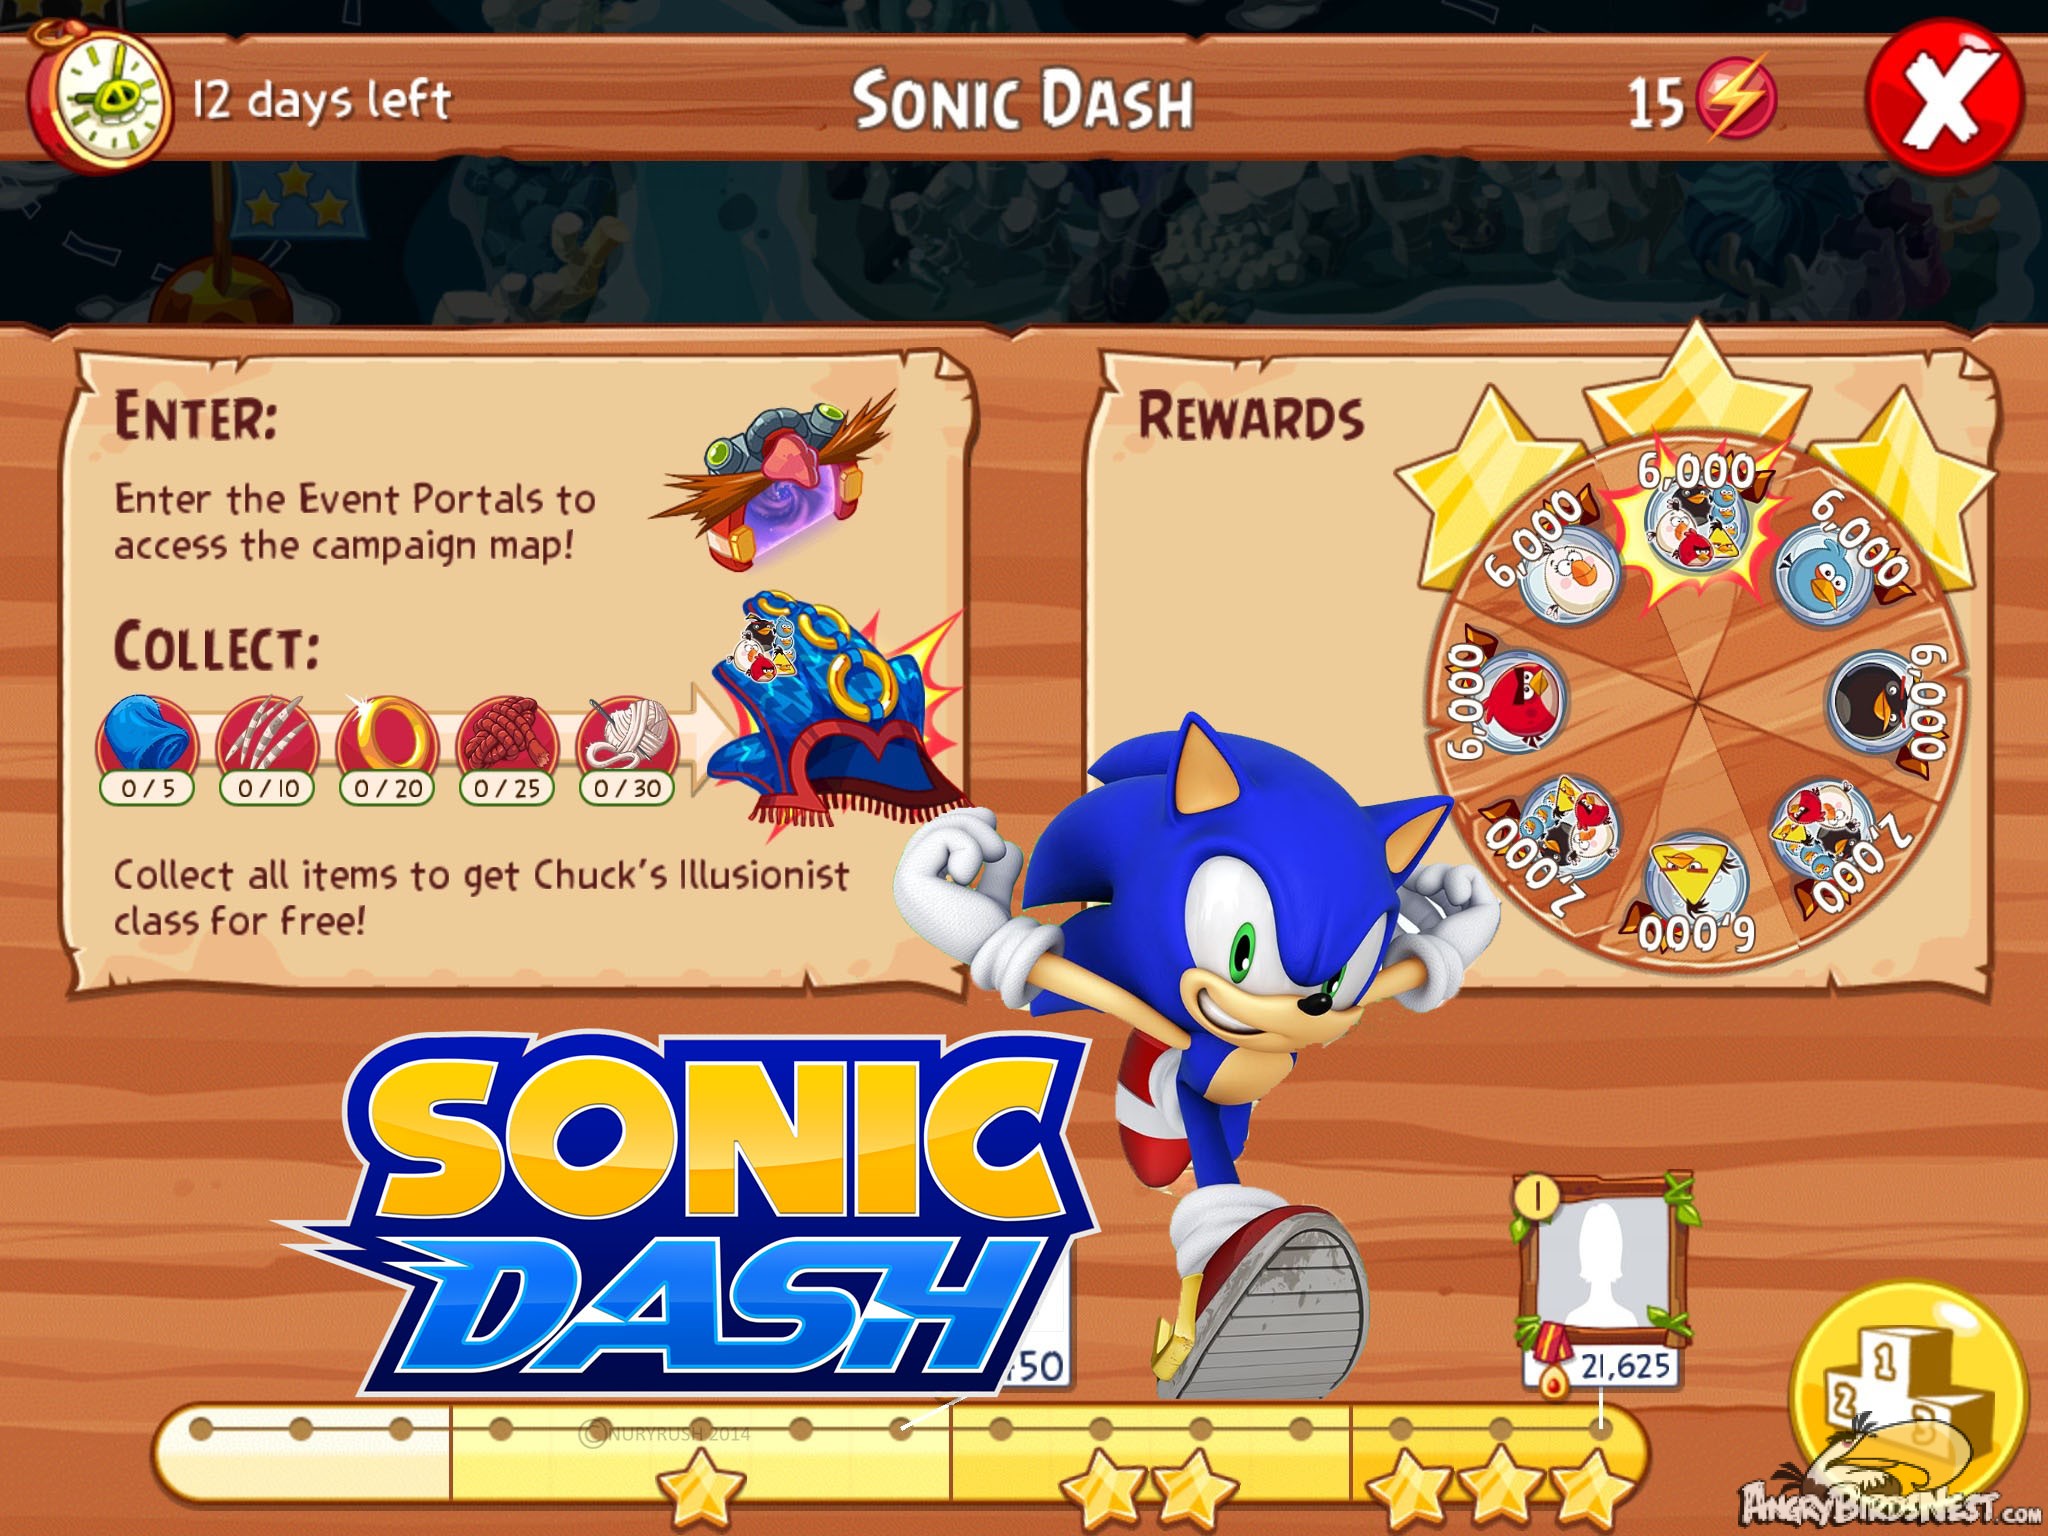 Angry Birds Sonic Dash Epic Archives - Sonic Retro